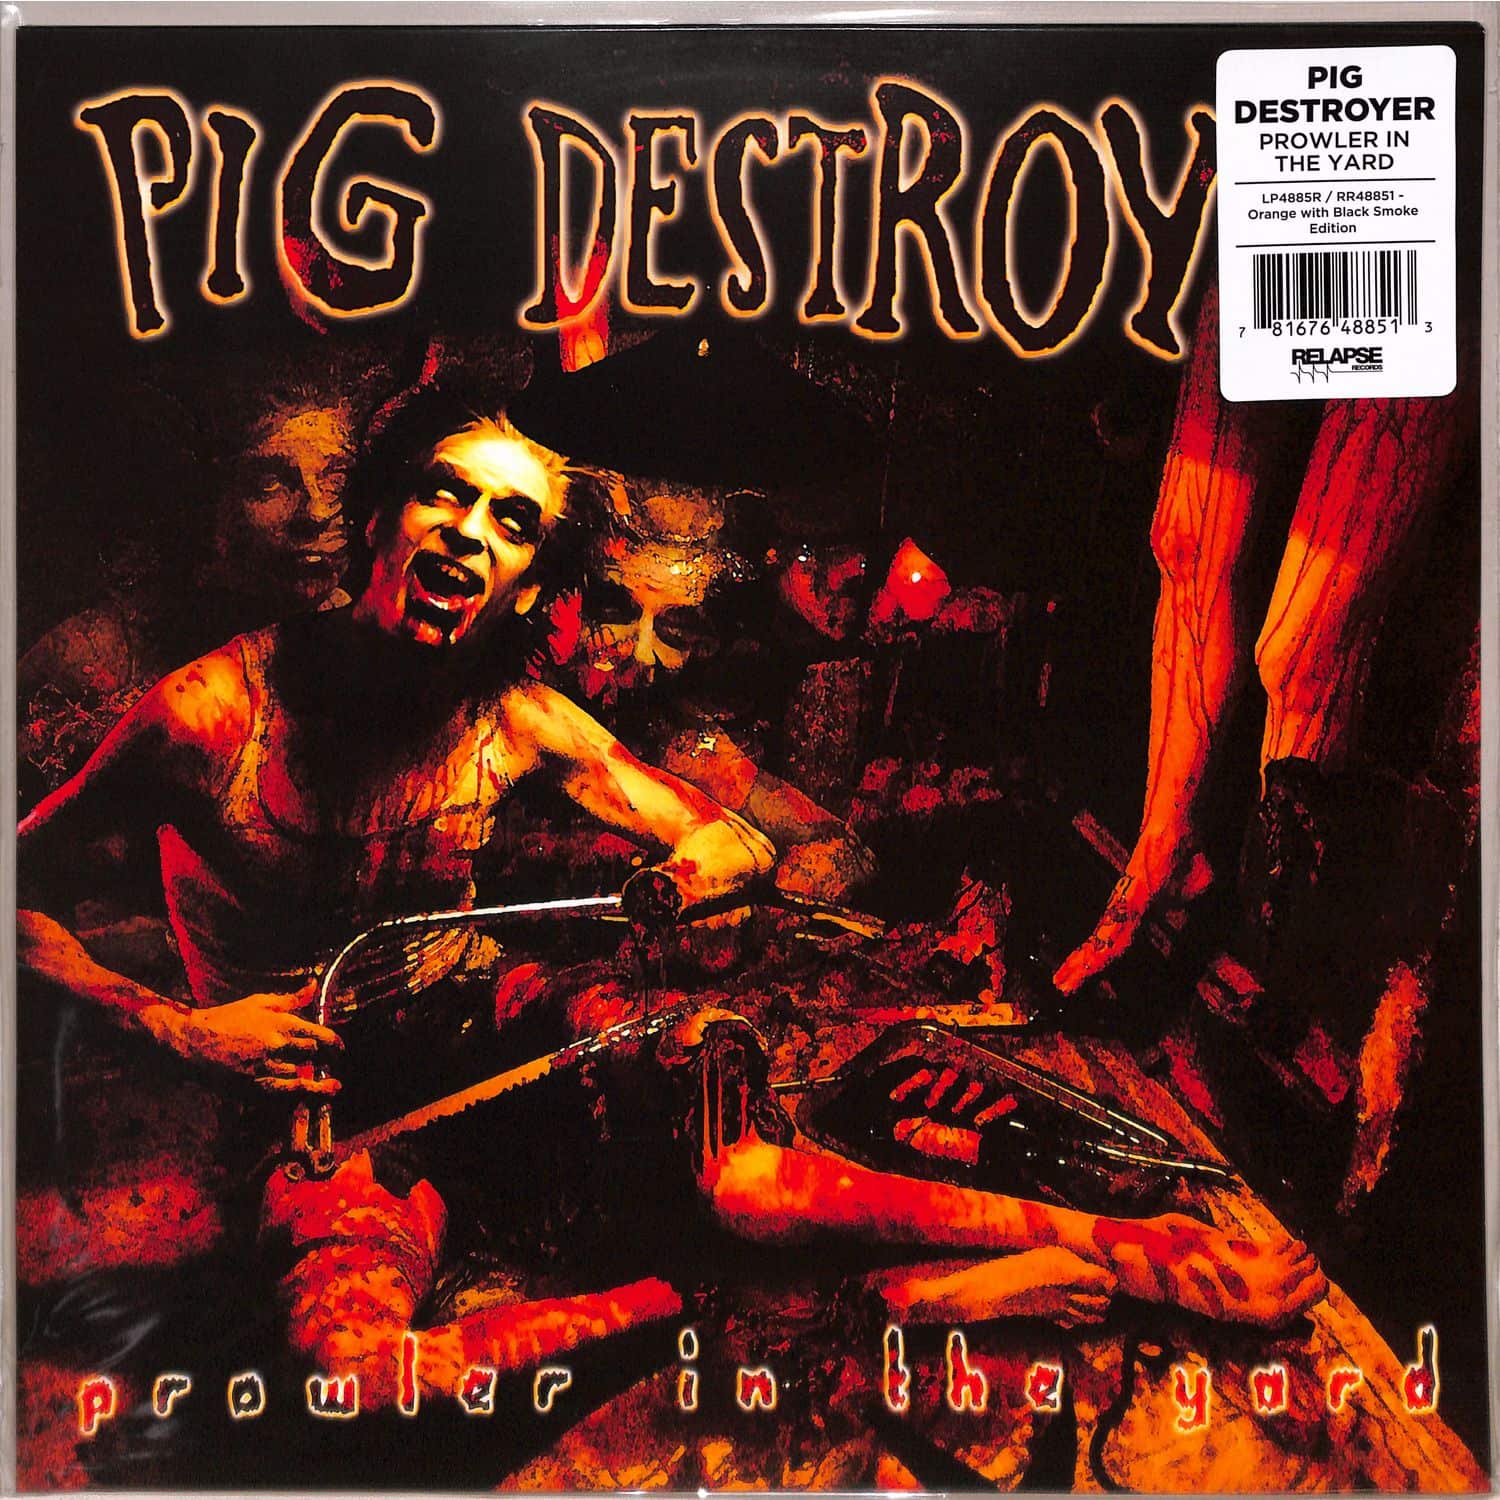 Pig Destroyer - PROWLER IN THE YARD 